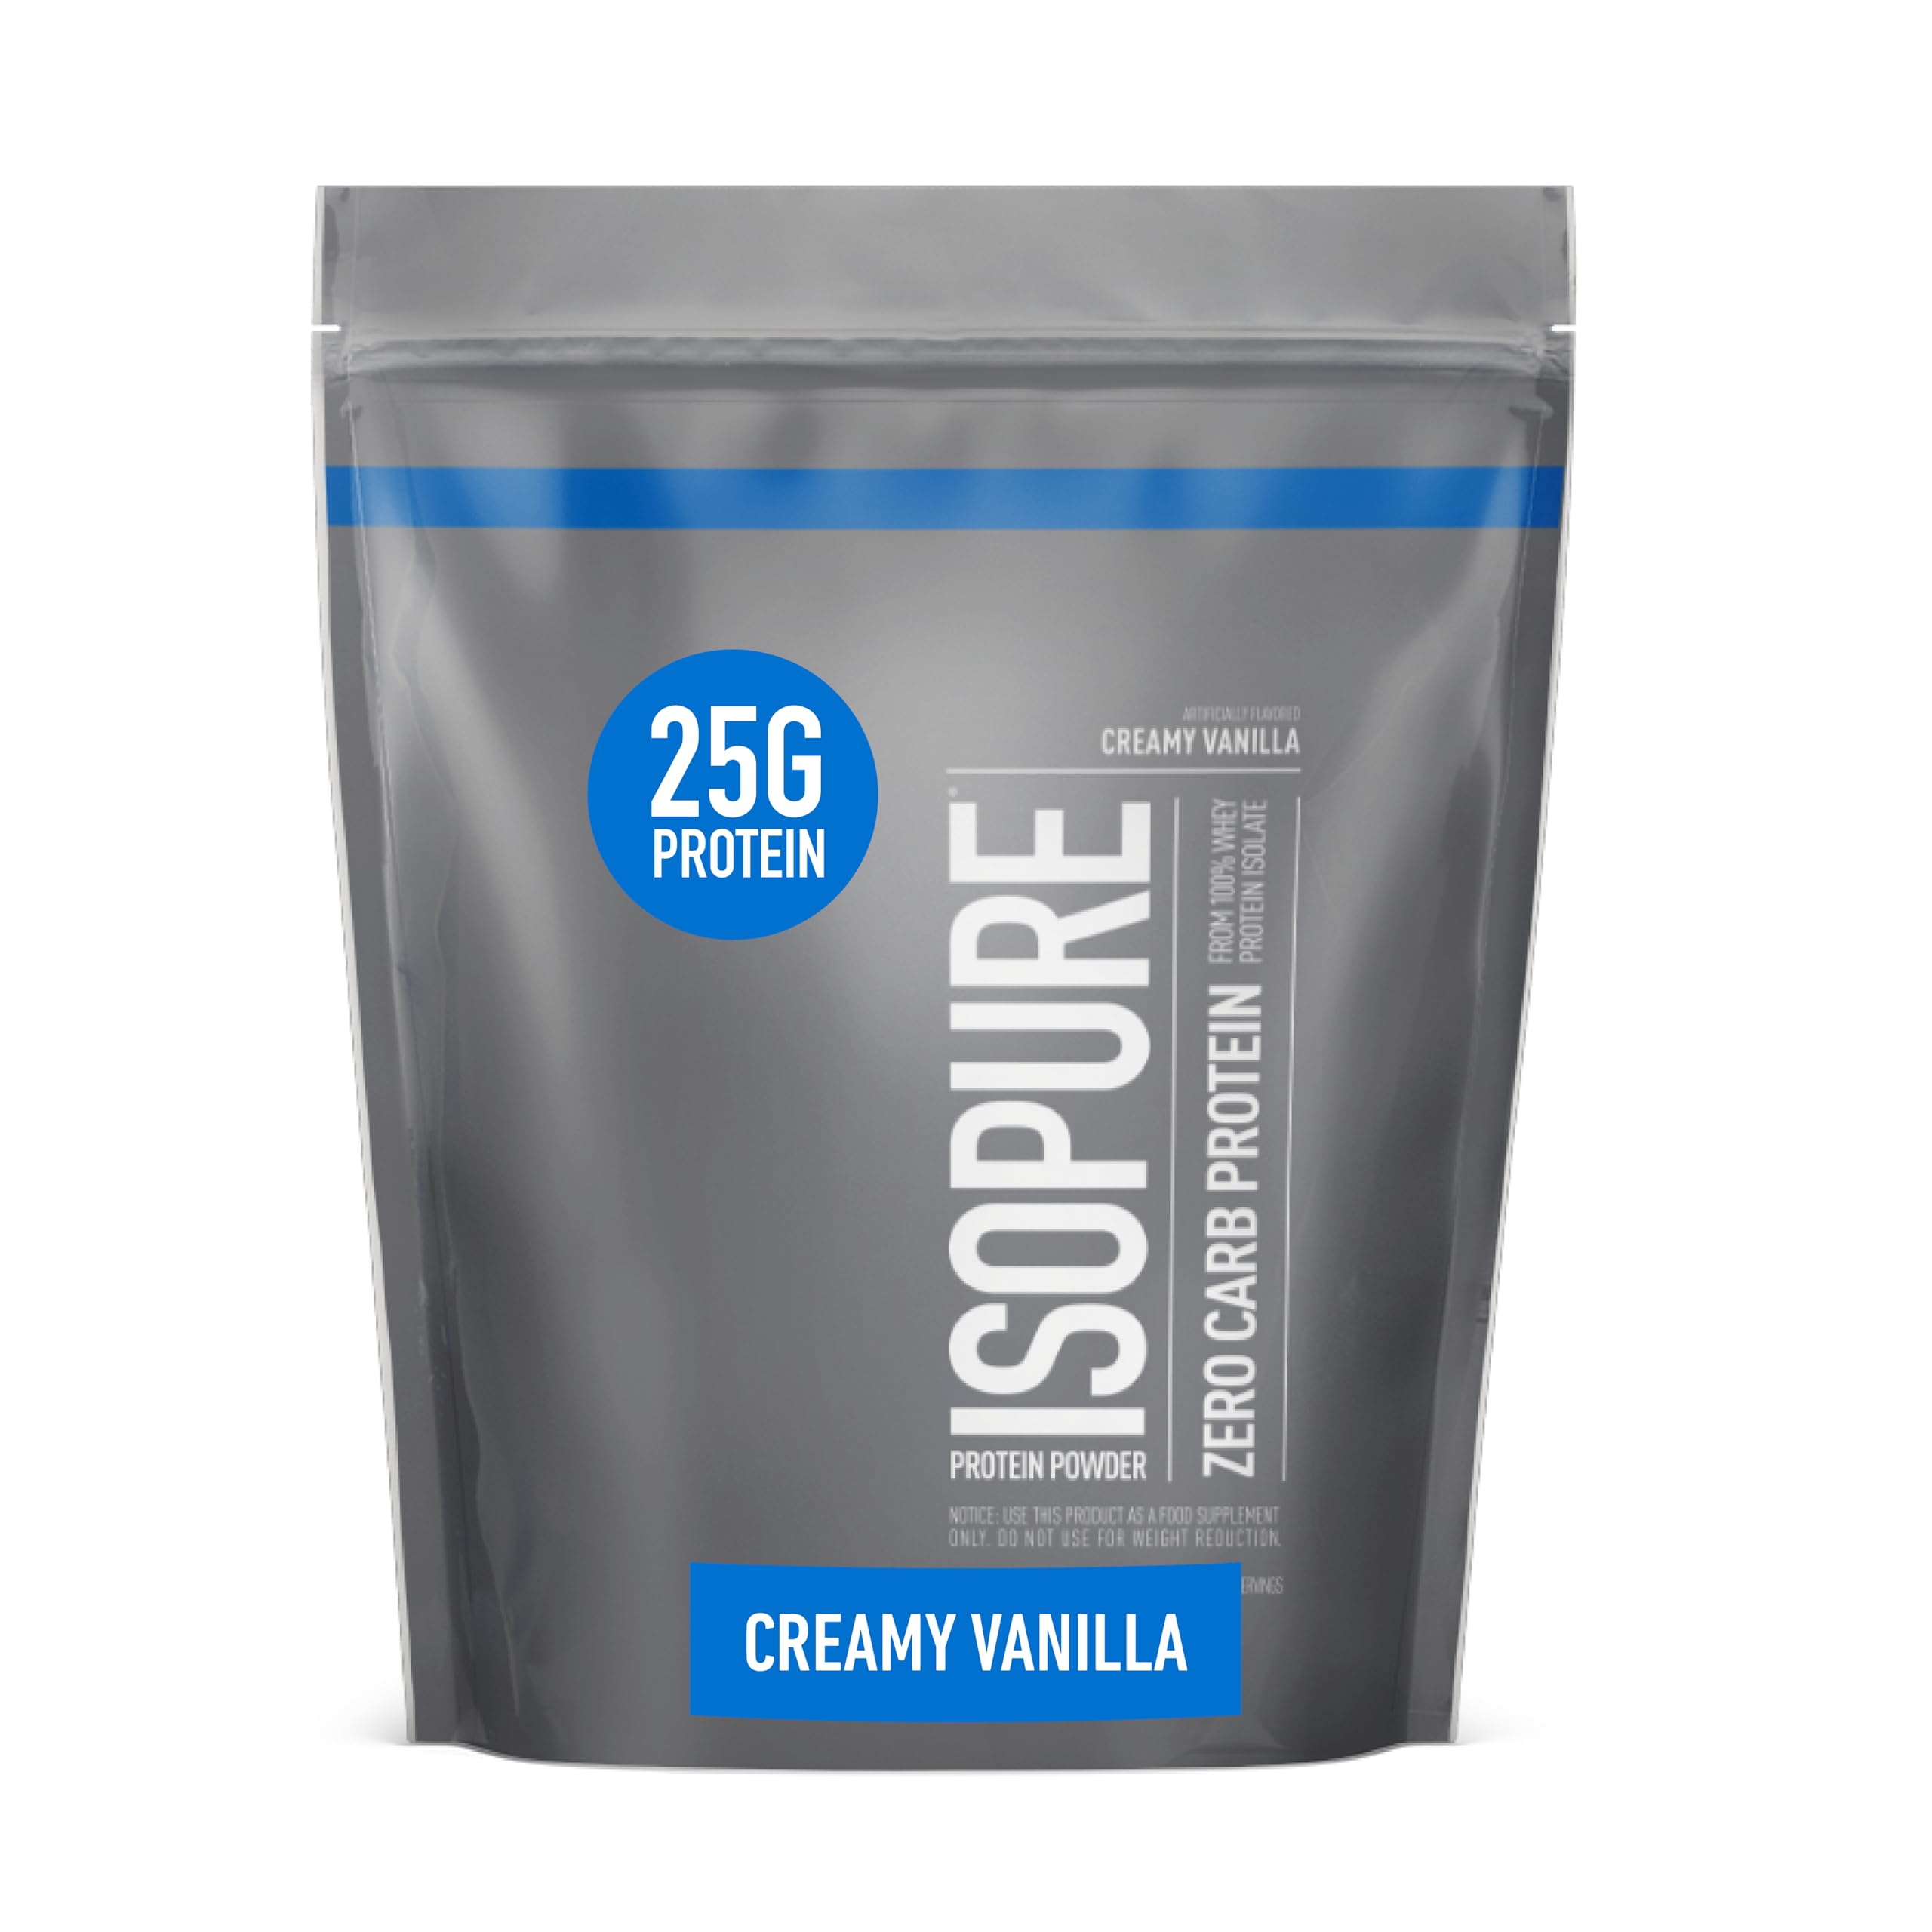 Isopure Creamy Vanilla Whey Isolate Protein Powder with Vitamin C & Zinc for Immune Support & Protein Powder, Zero Carb Whey Isolate, Gluten Free